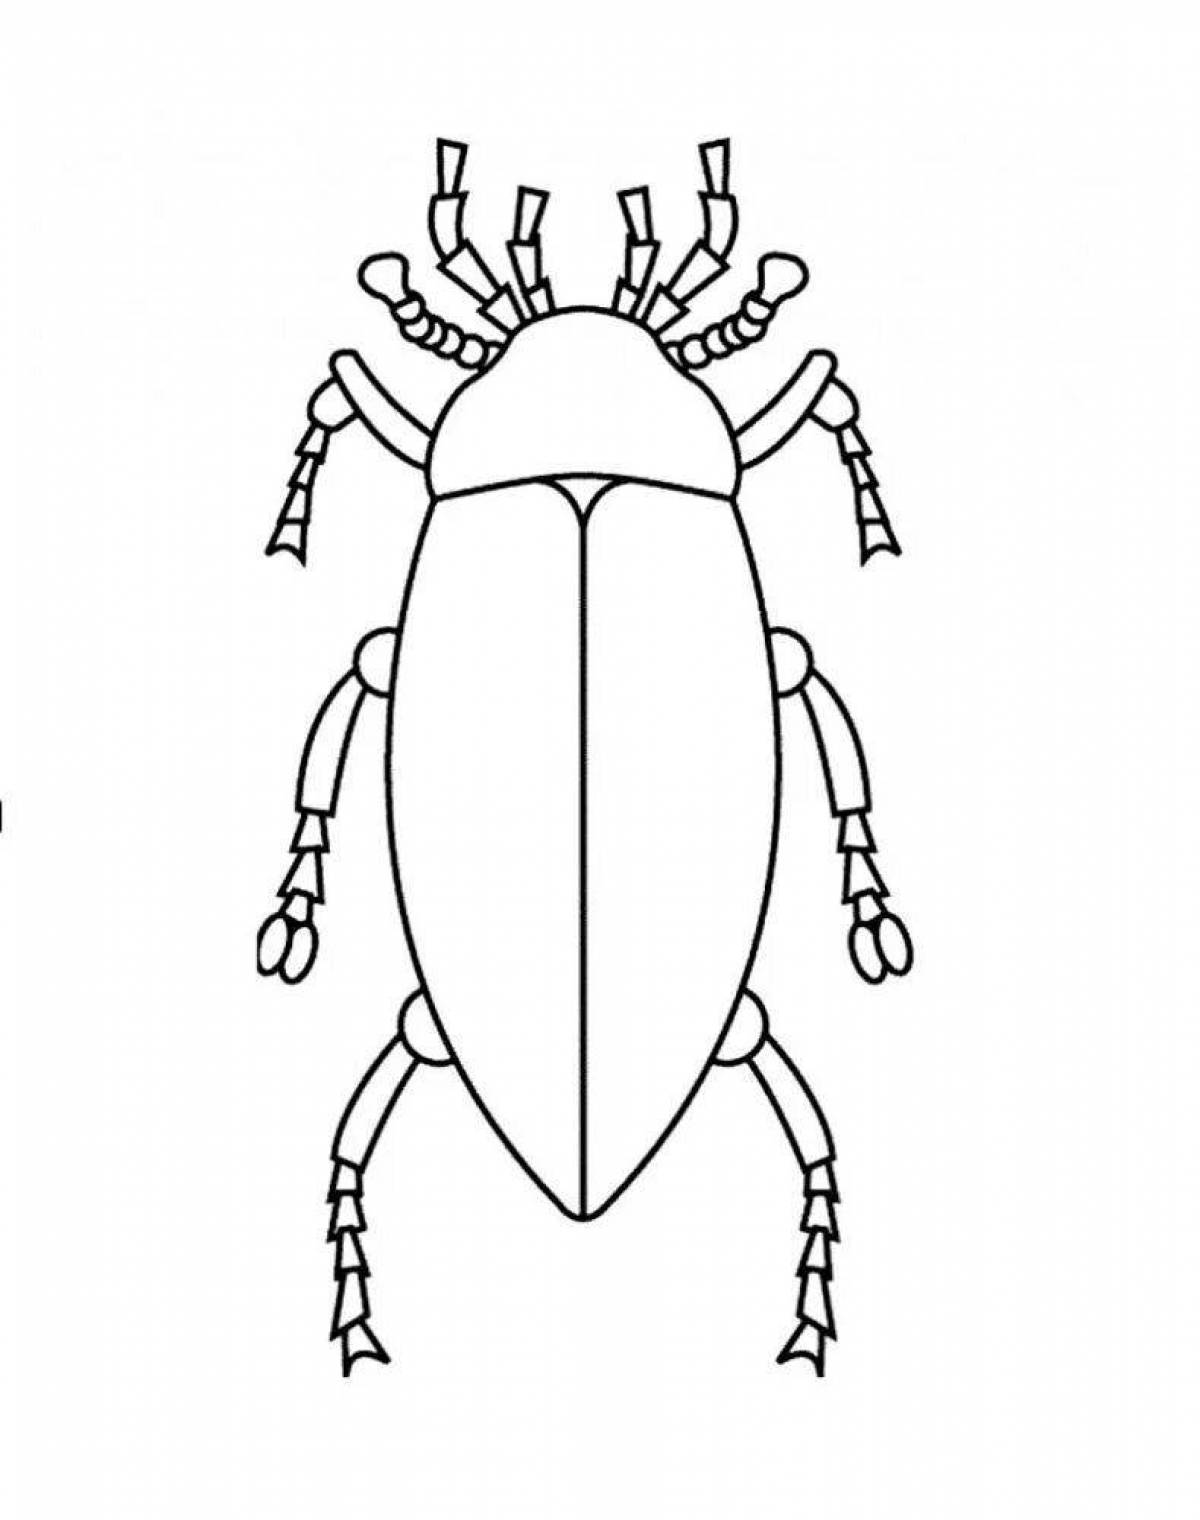 Exquisite beetle coloring book